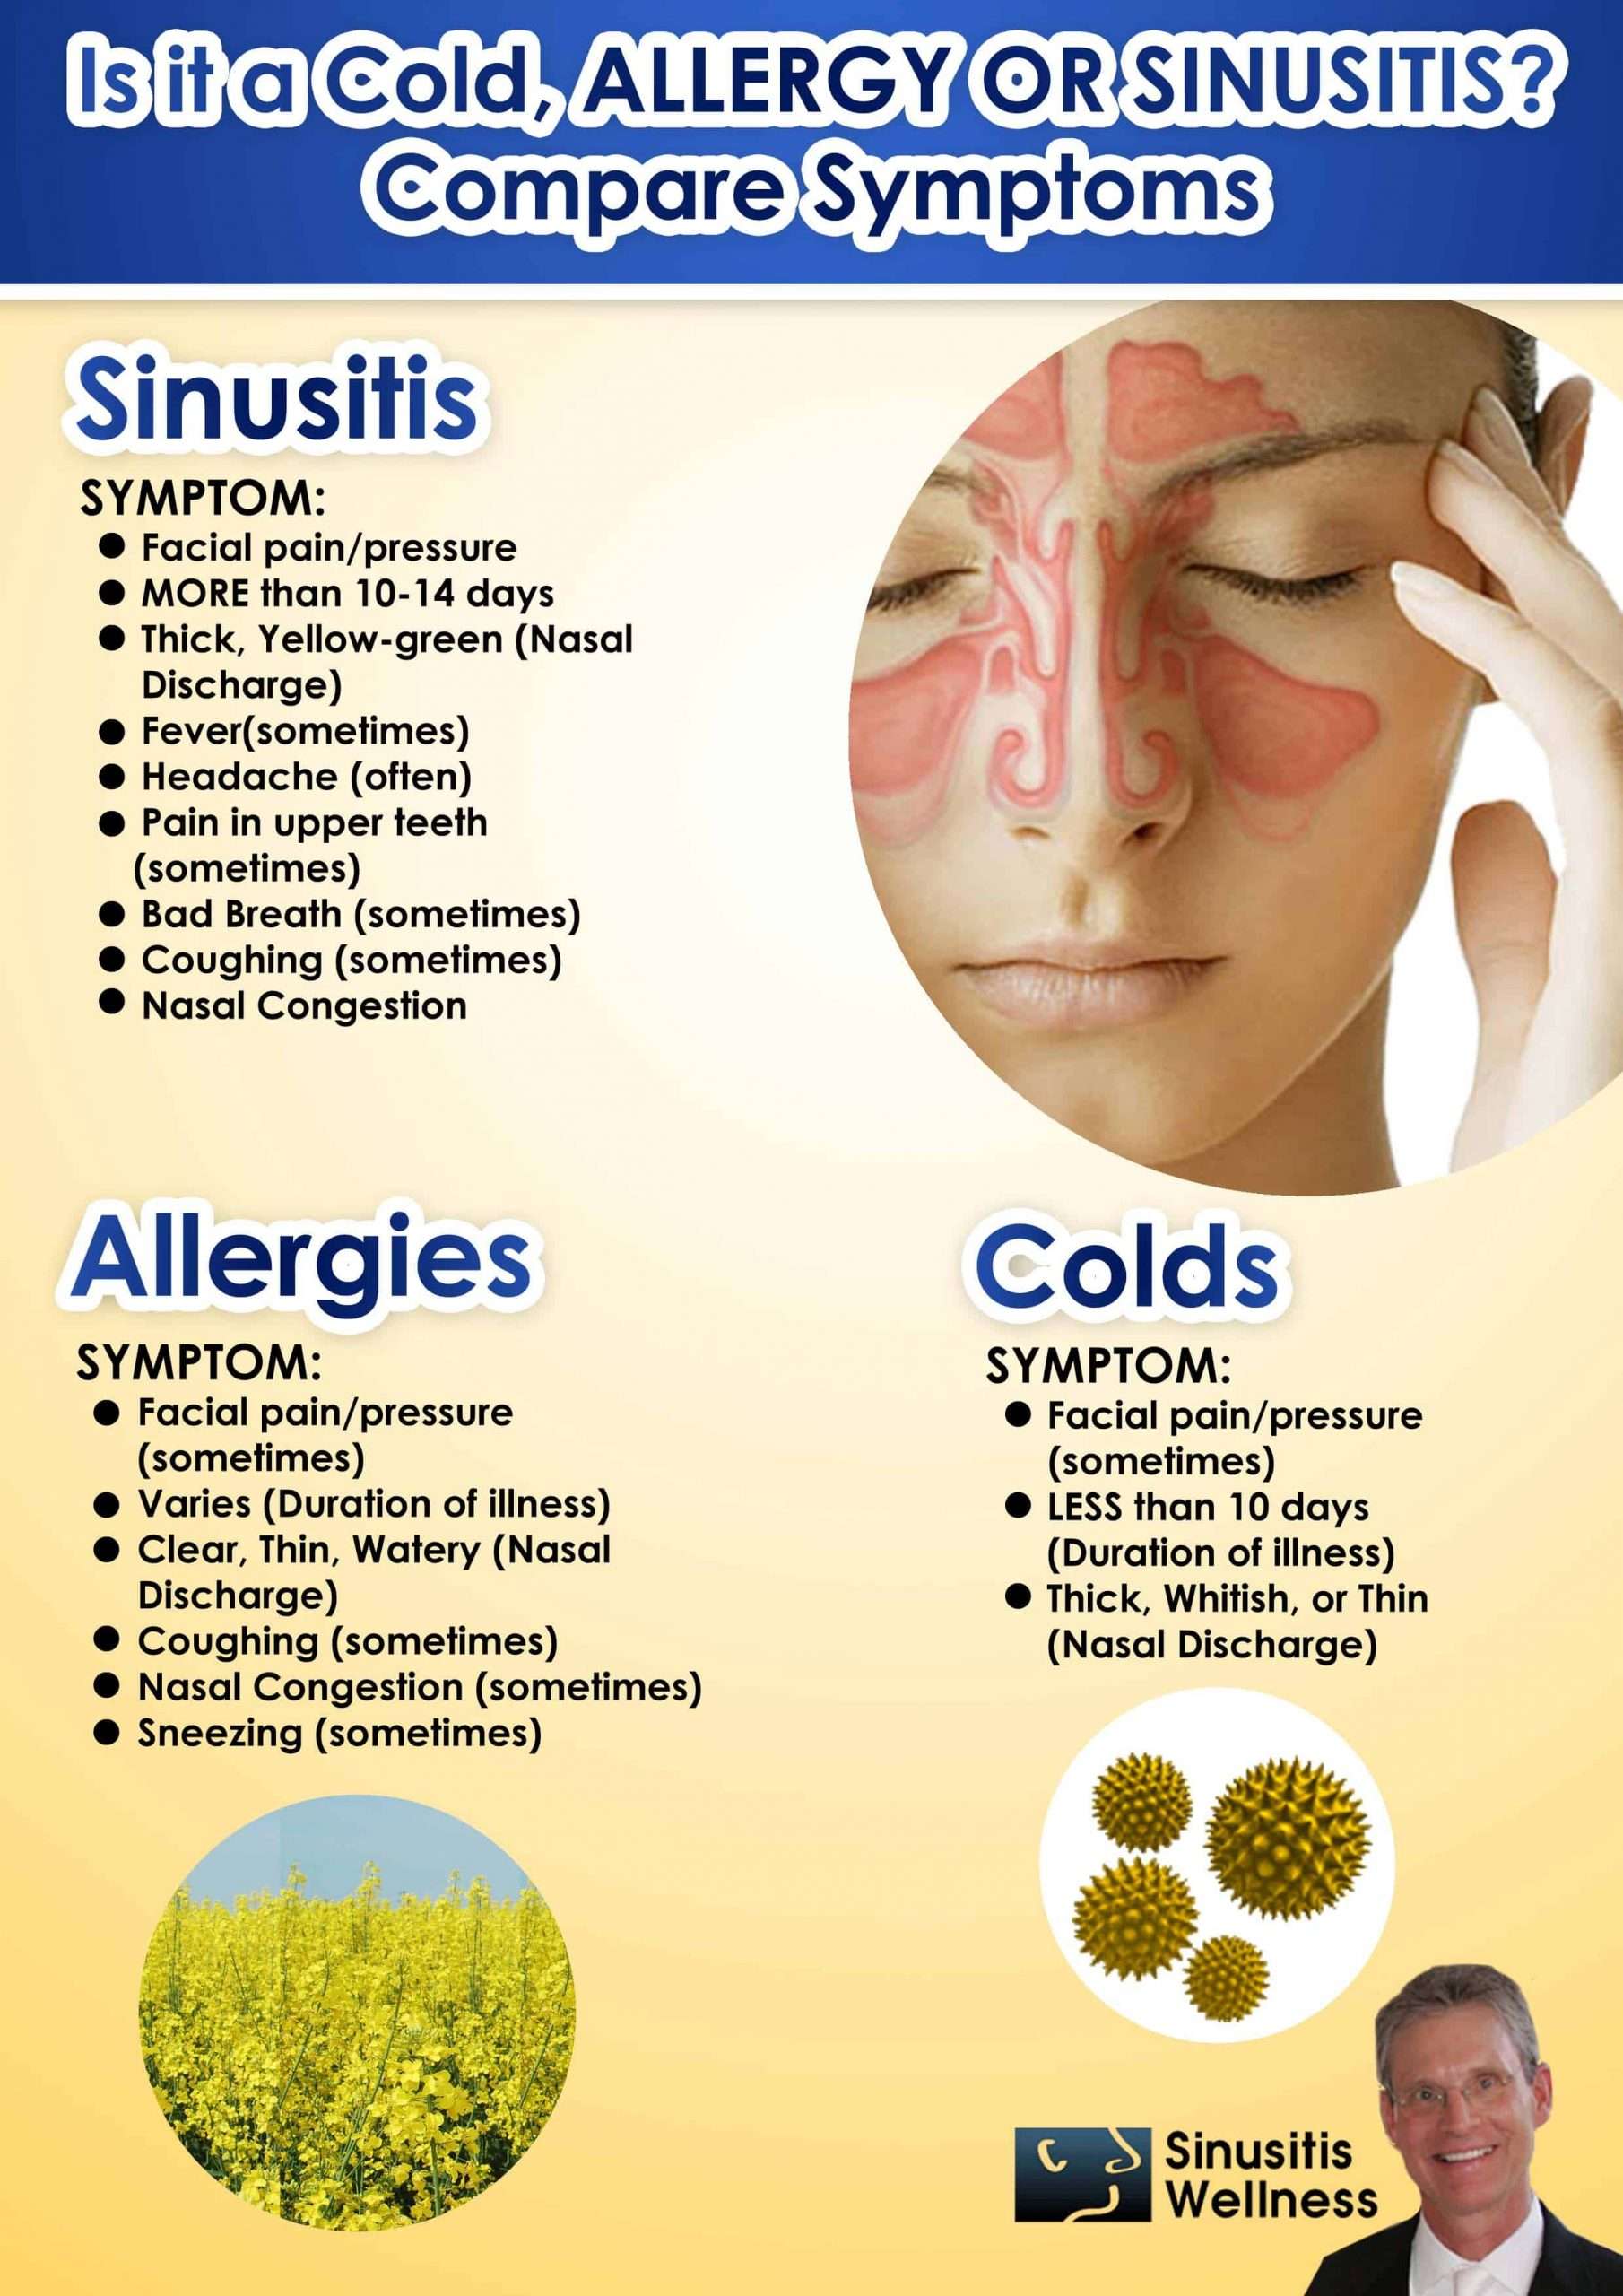 Do I have a Cold Allergies or Sinusitis